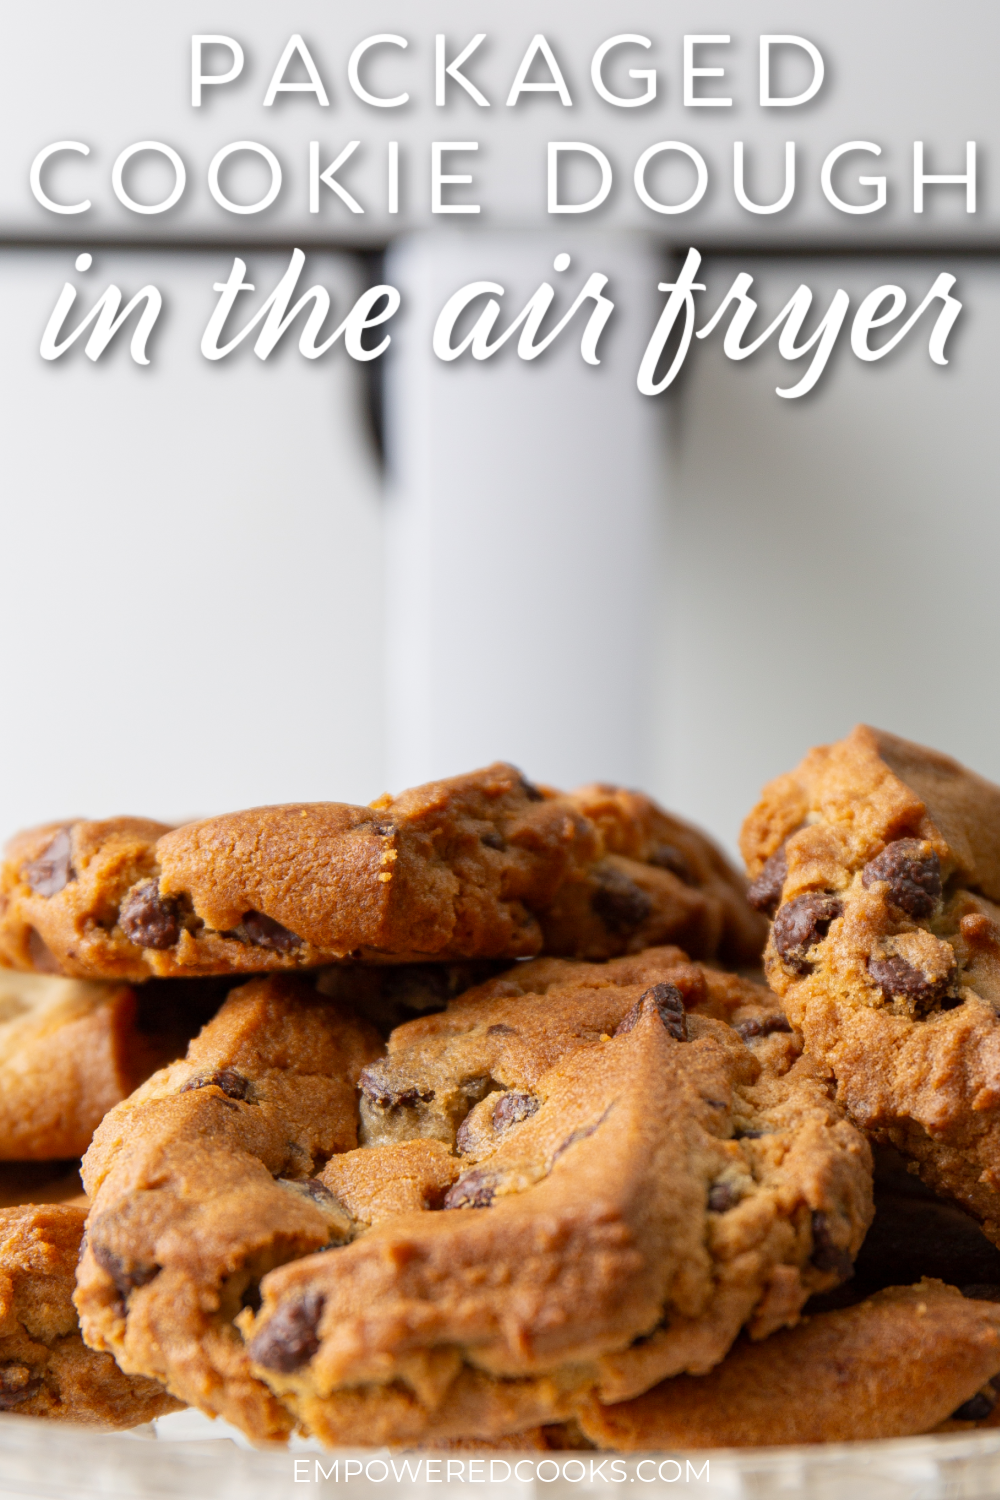 packaged cookie dough in the air fryer